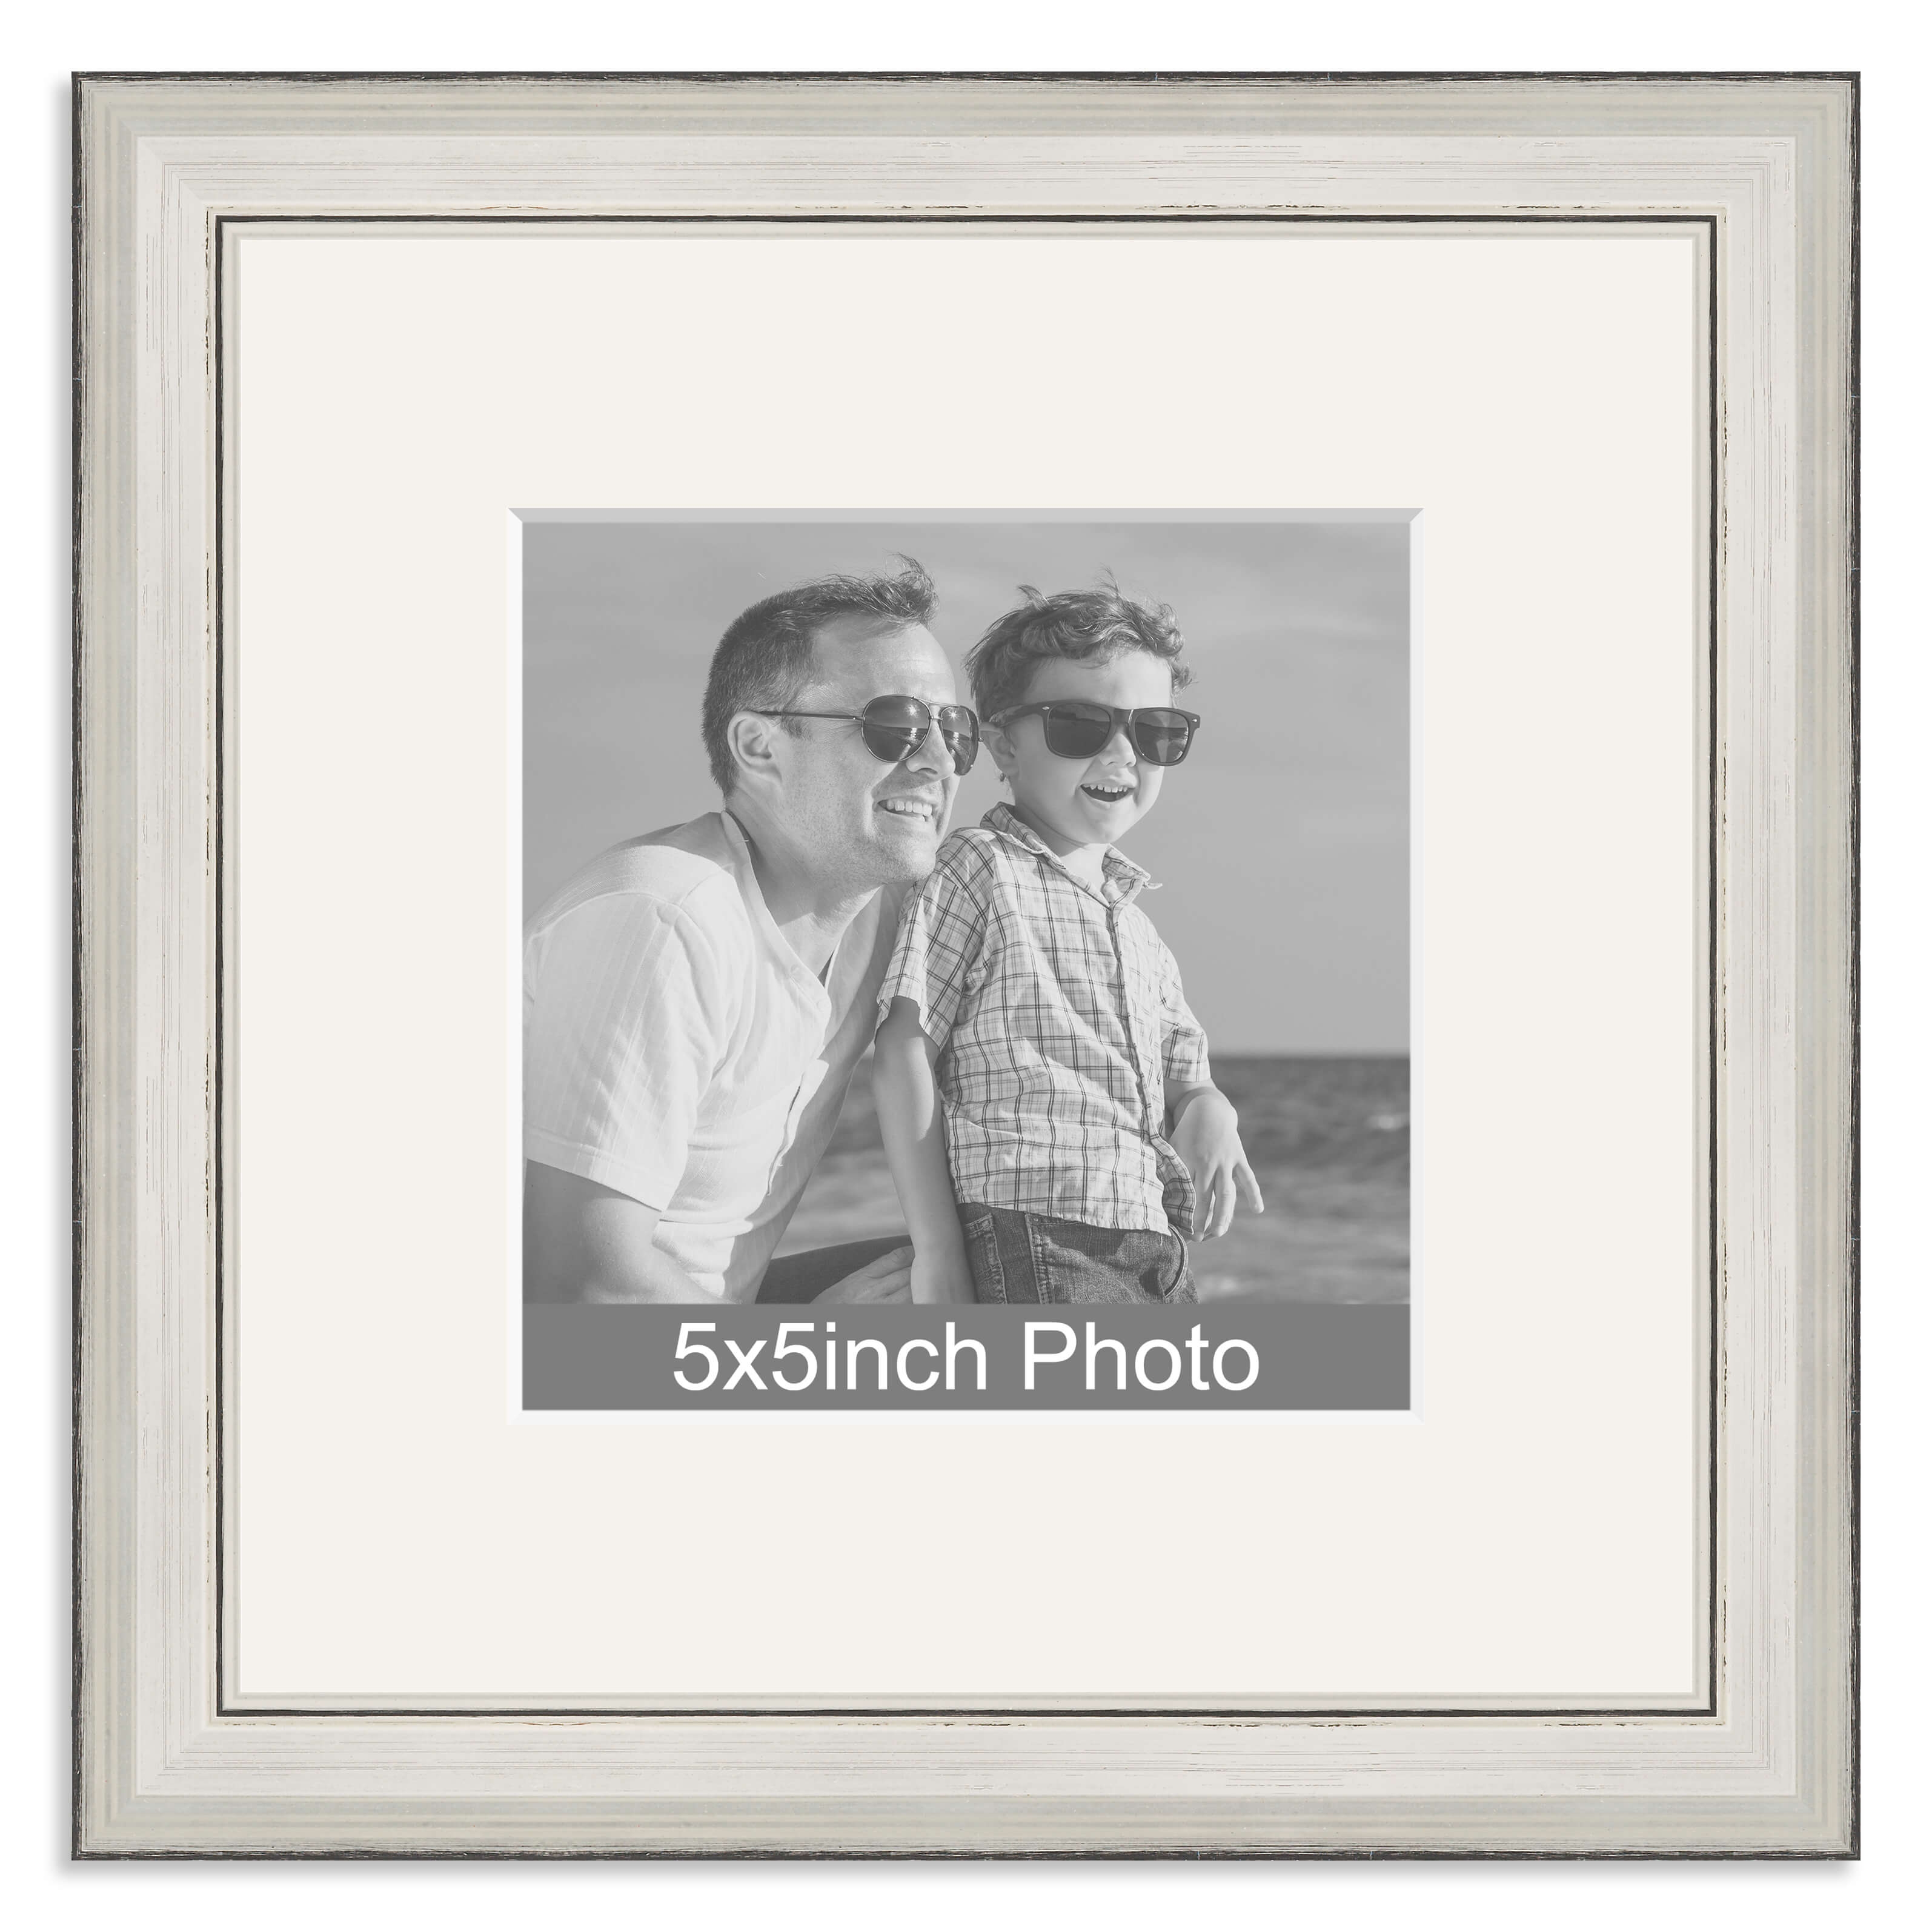 Silver Wooden Photo Frame with mount for a 5x5in Photo – Photo uploaded below